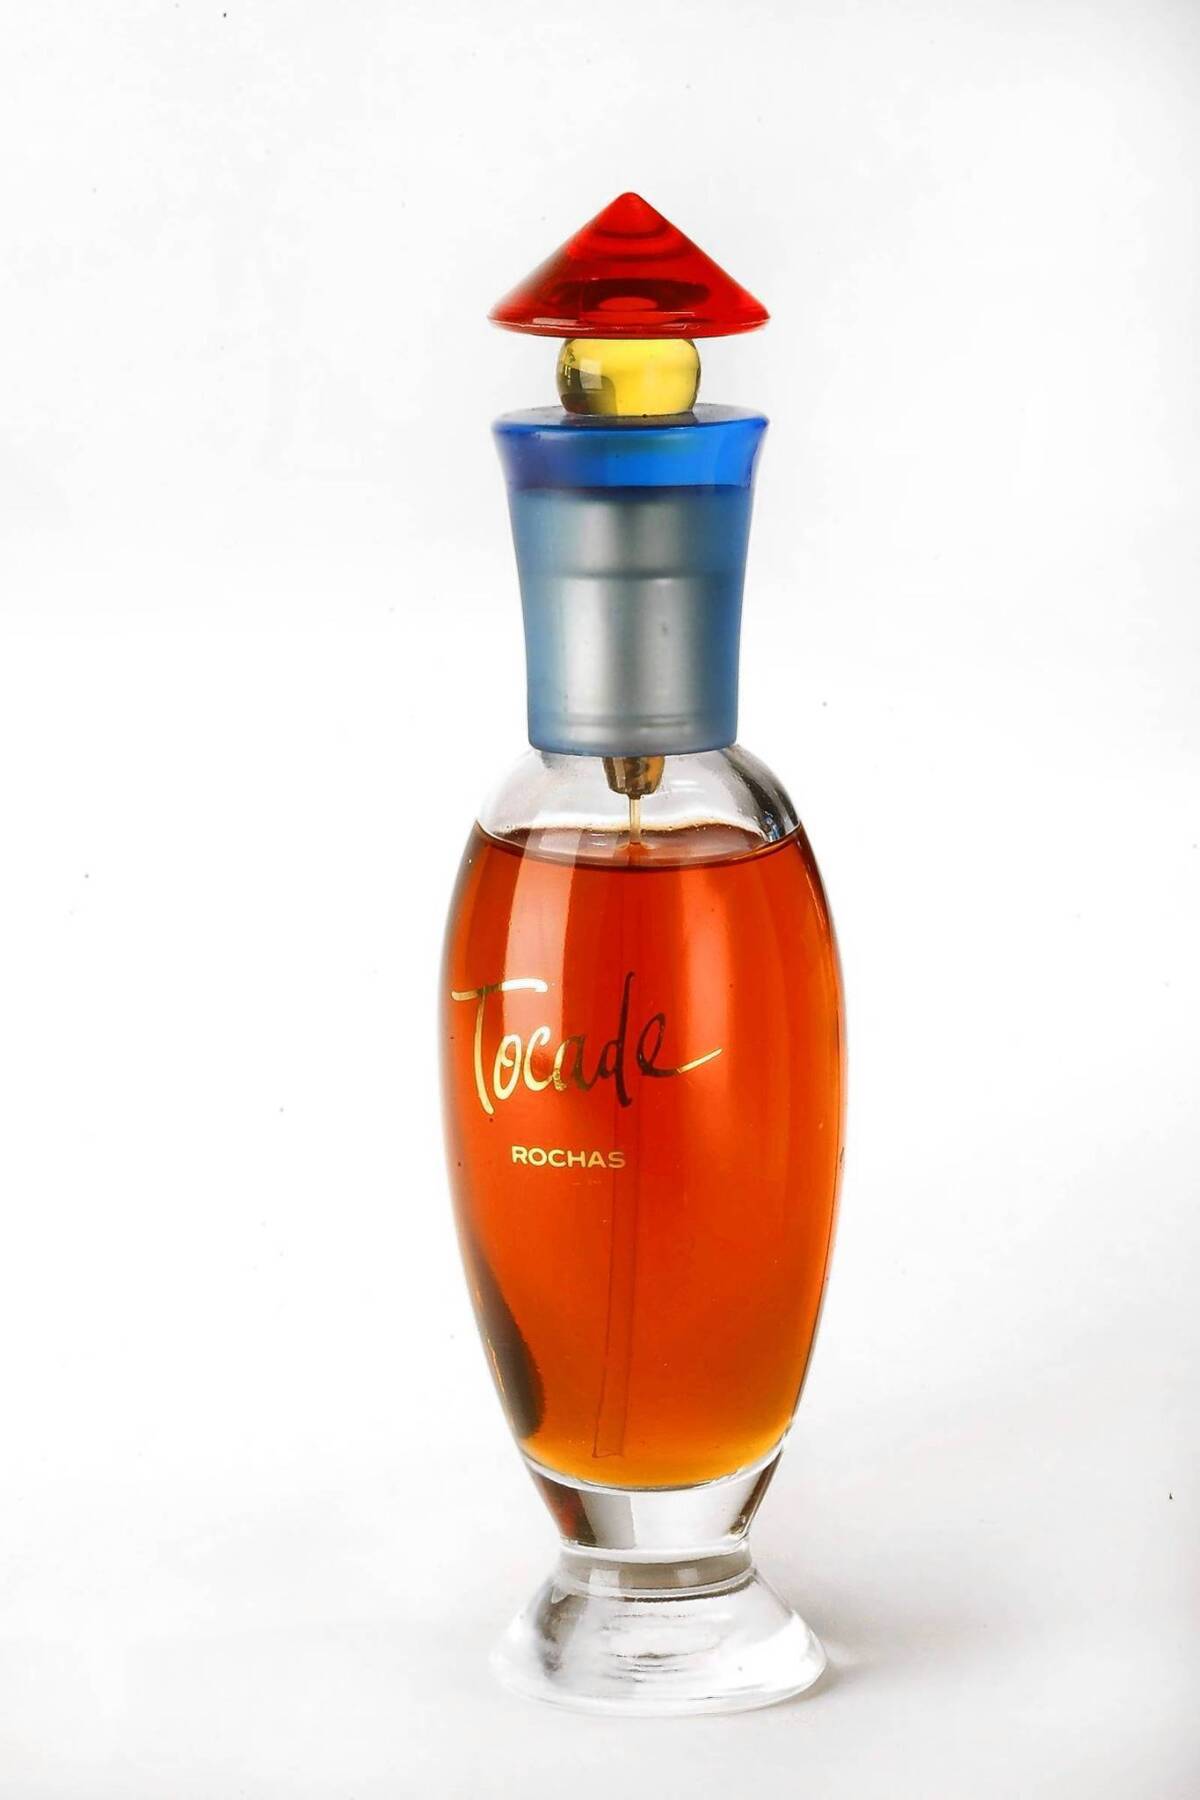 Mass-Market Perfumes Developed by High-Priced Noses - The New York